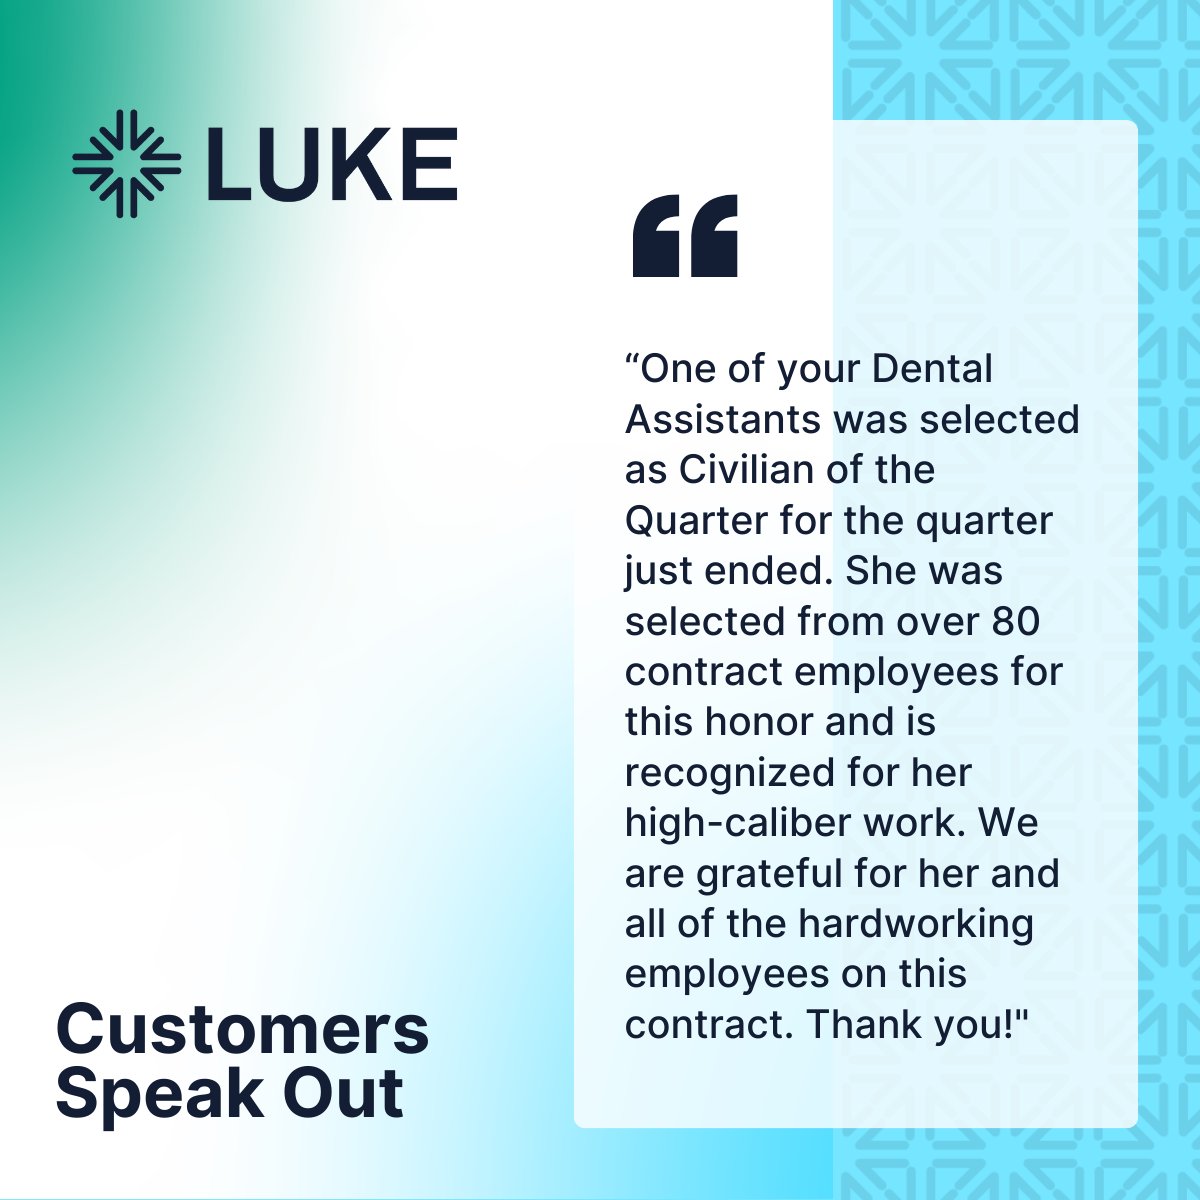 Positive feedback on our Dental Assistant's stellar performance lights up our day. It's the trust and appreciation of our customers that drive us to continually elevate healthcare standards. #CustomerAppreciation #TeamLUKE